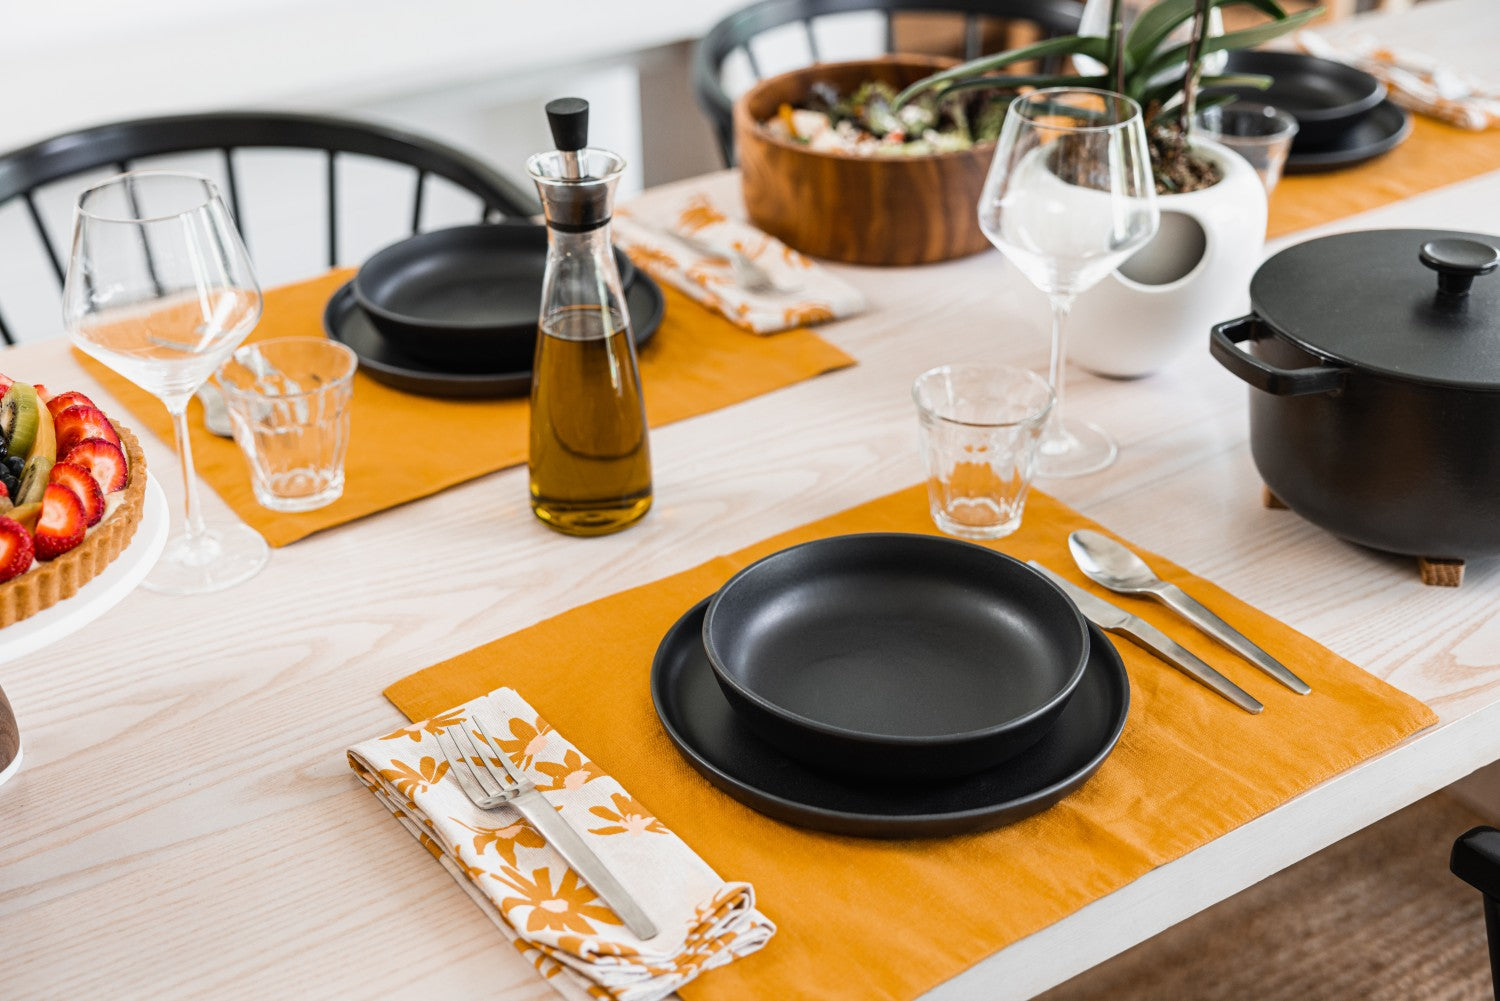 Place setting with golden yellow and black accents